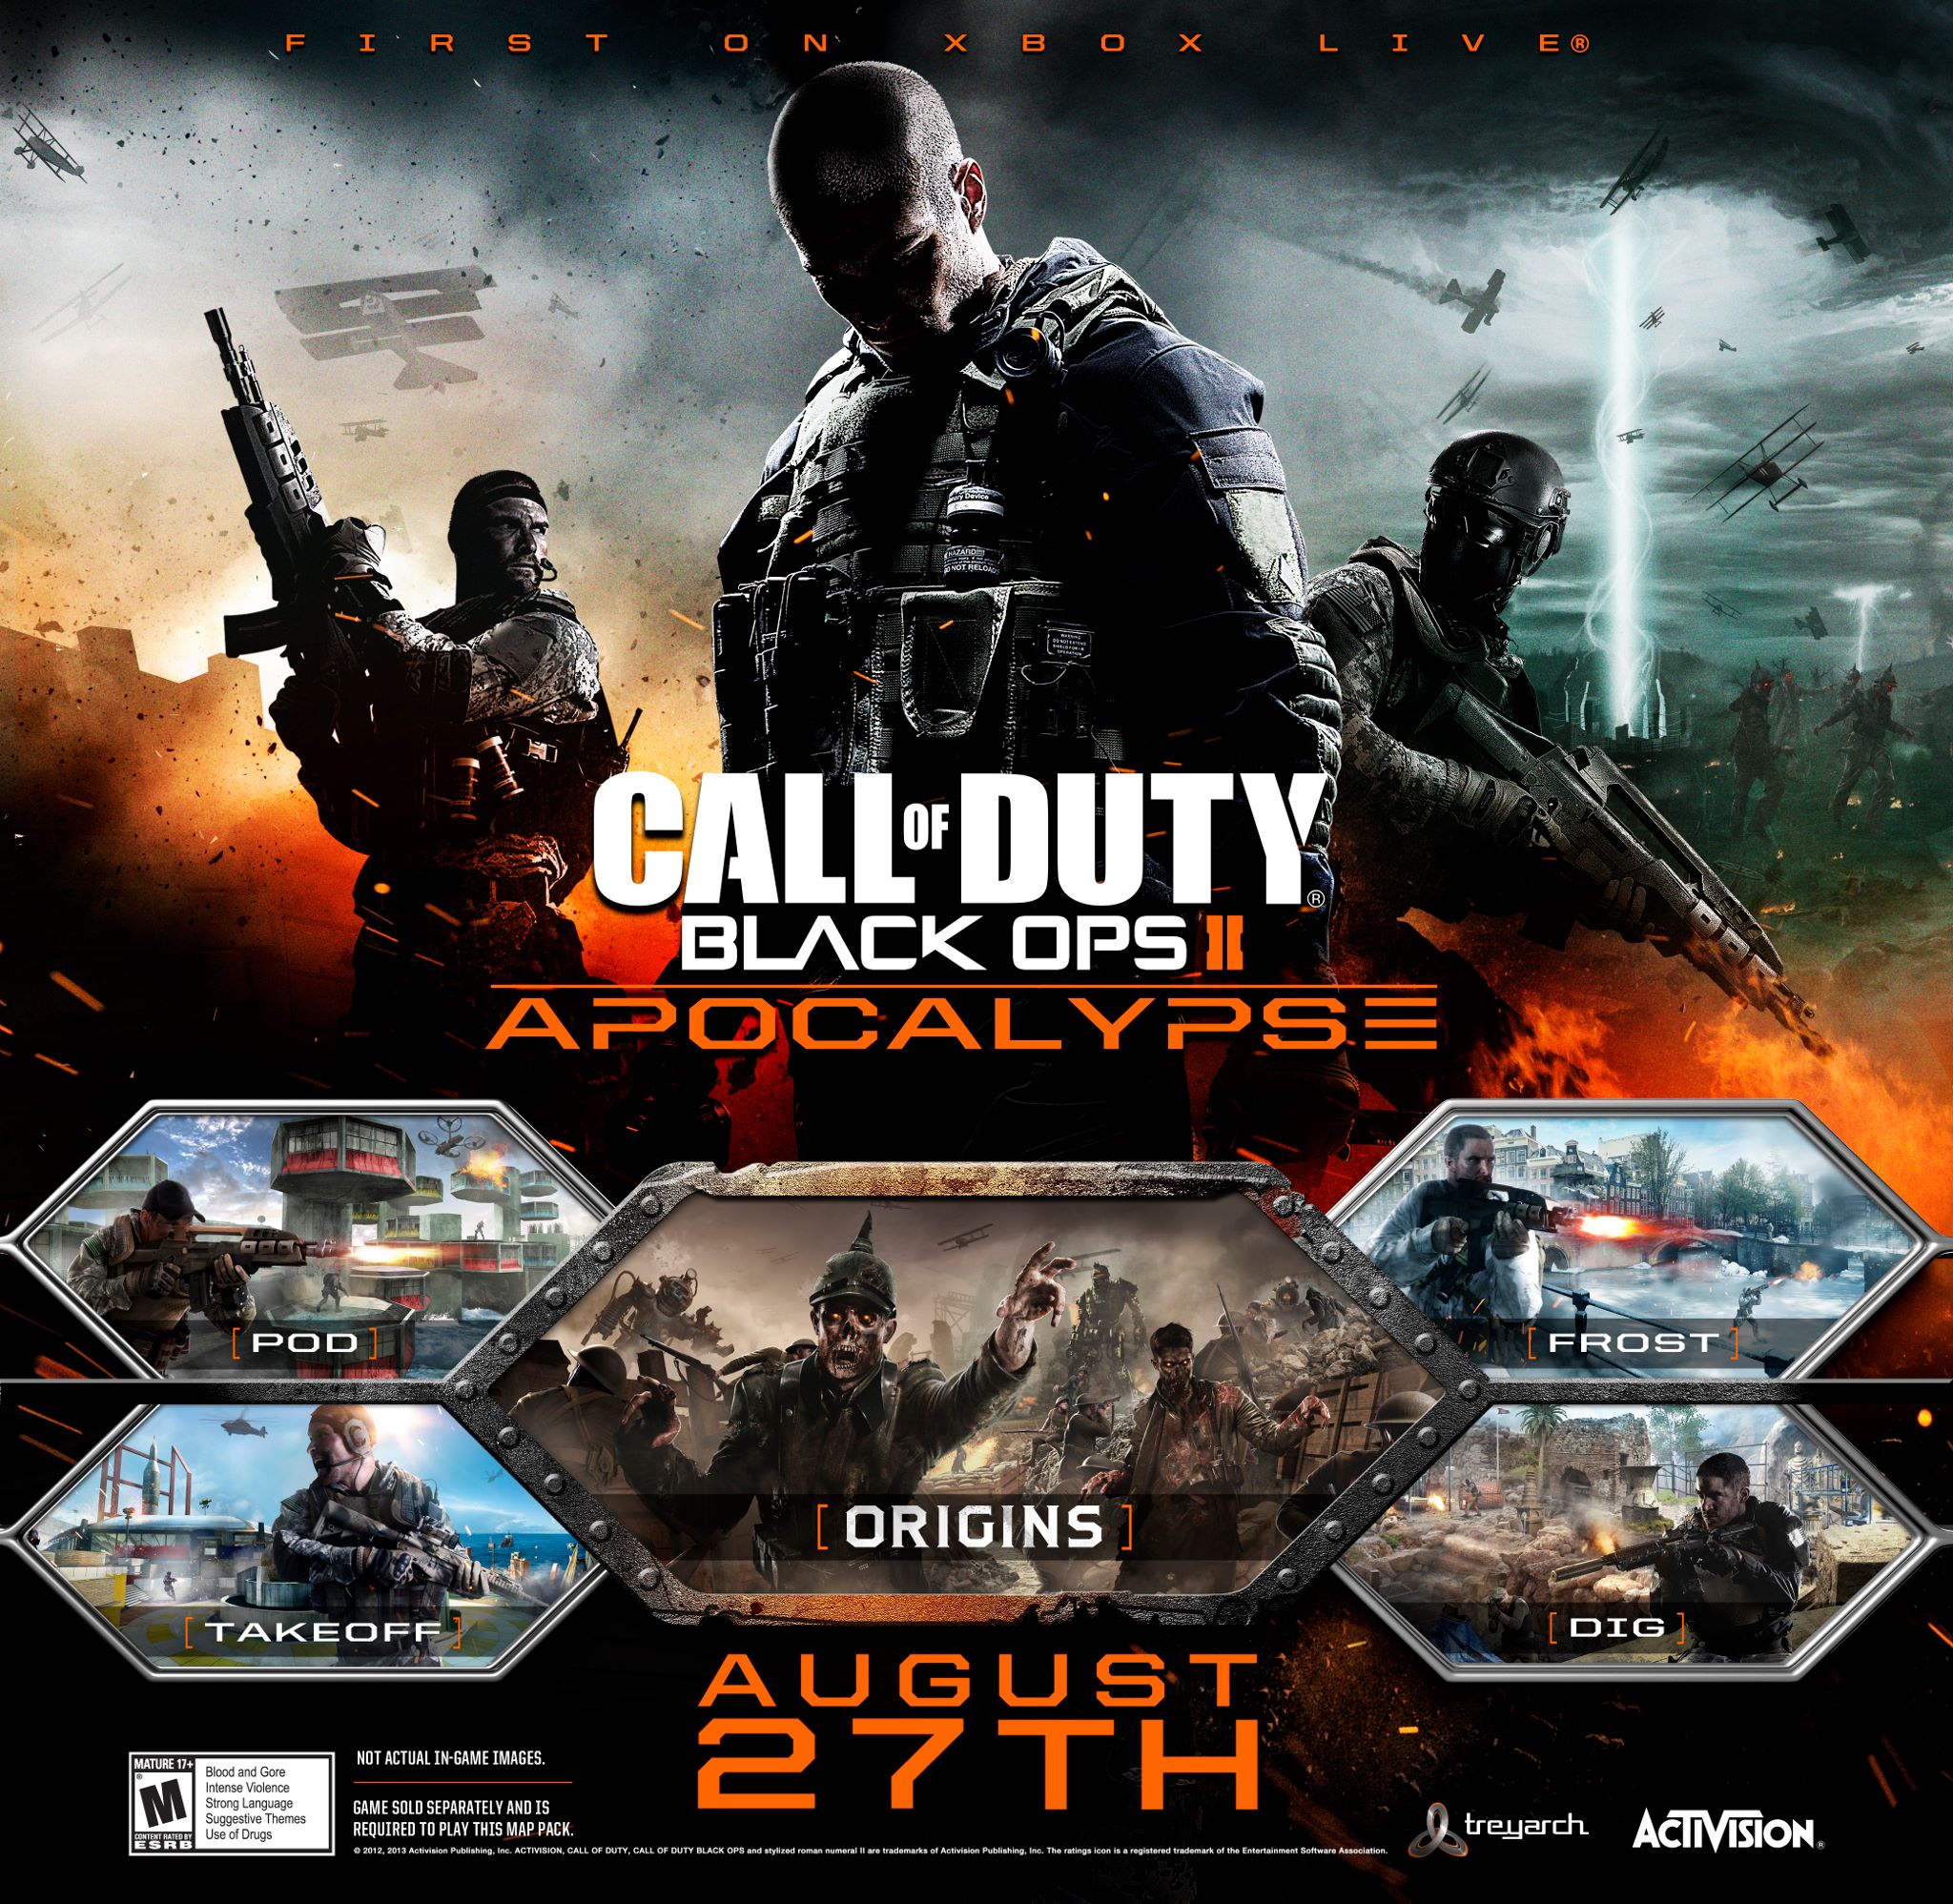 Call of Duty Black Ops 2 – announcement due tonight